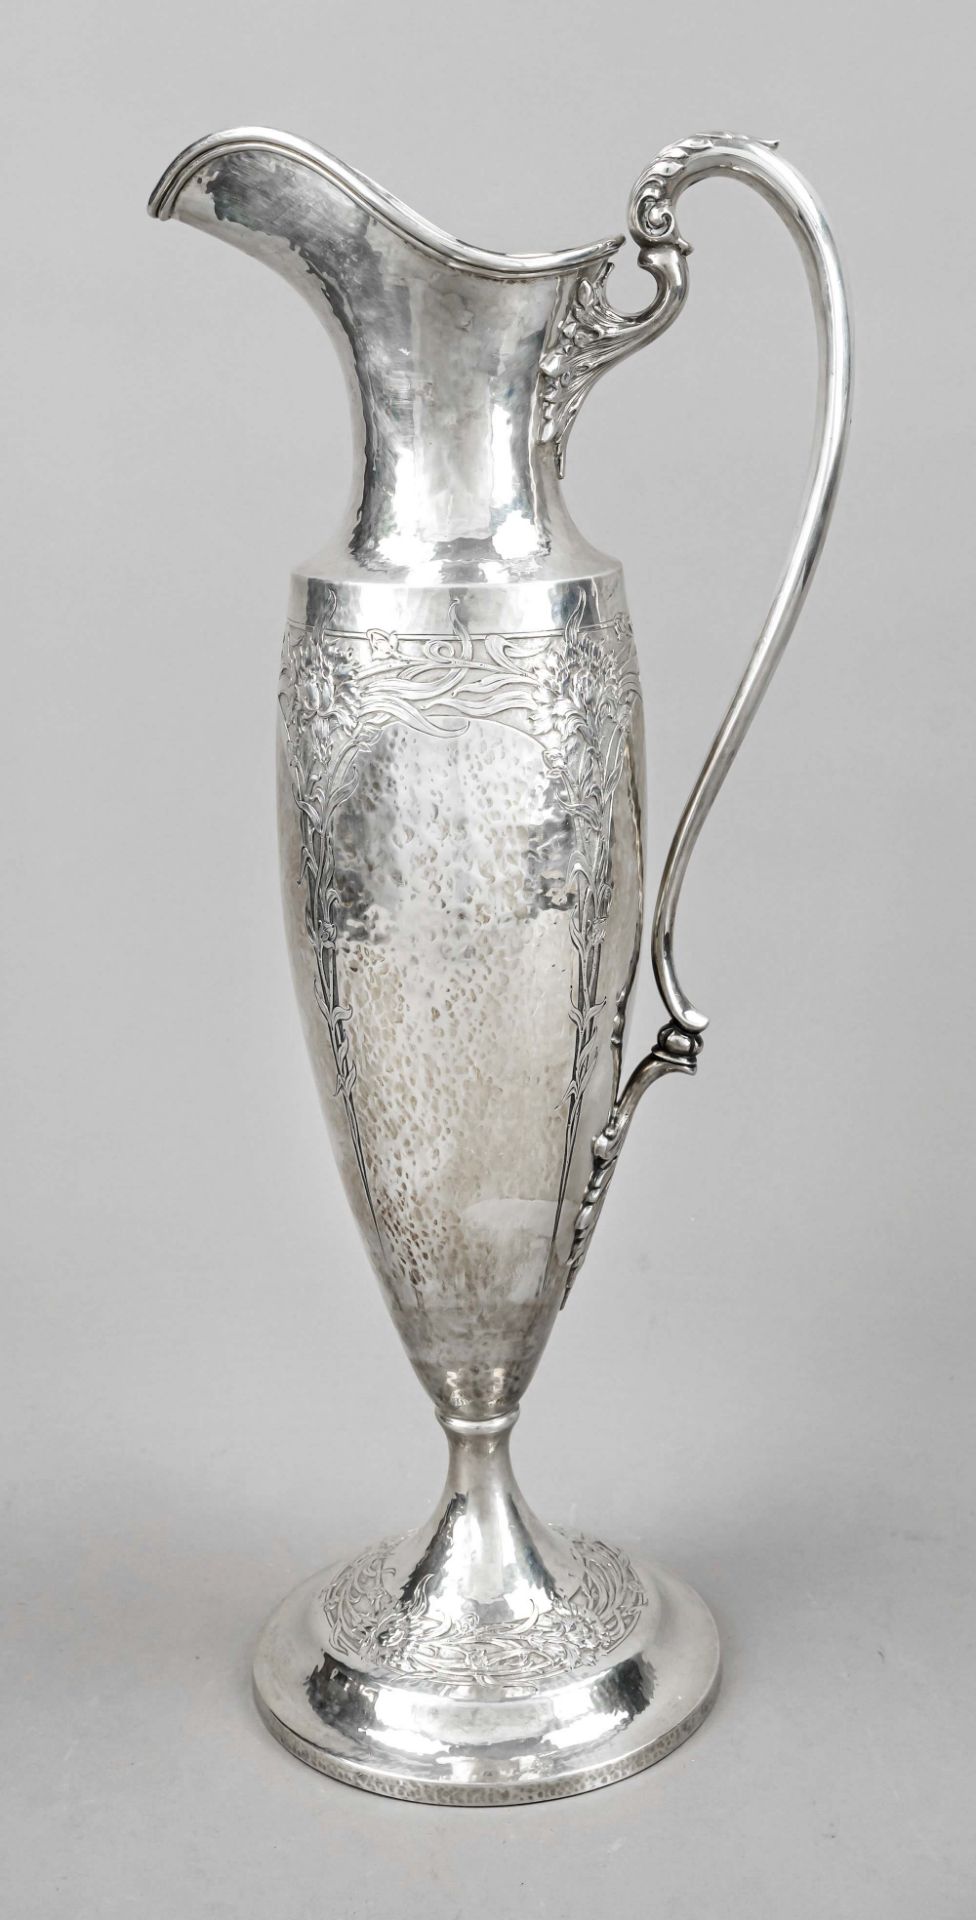 Tall jug, probably USA, early 20th century, sterling silver 925/000, round, domed base, slender